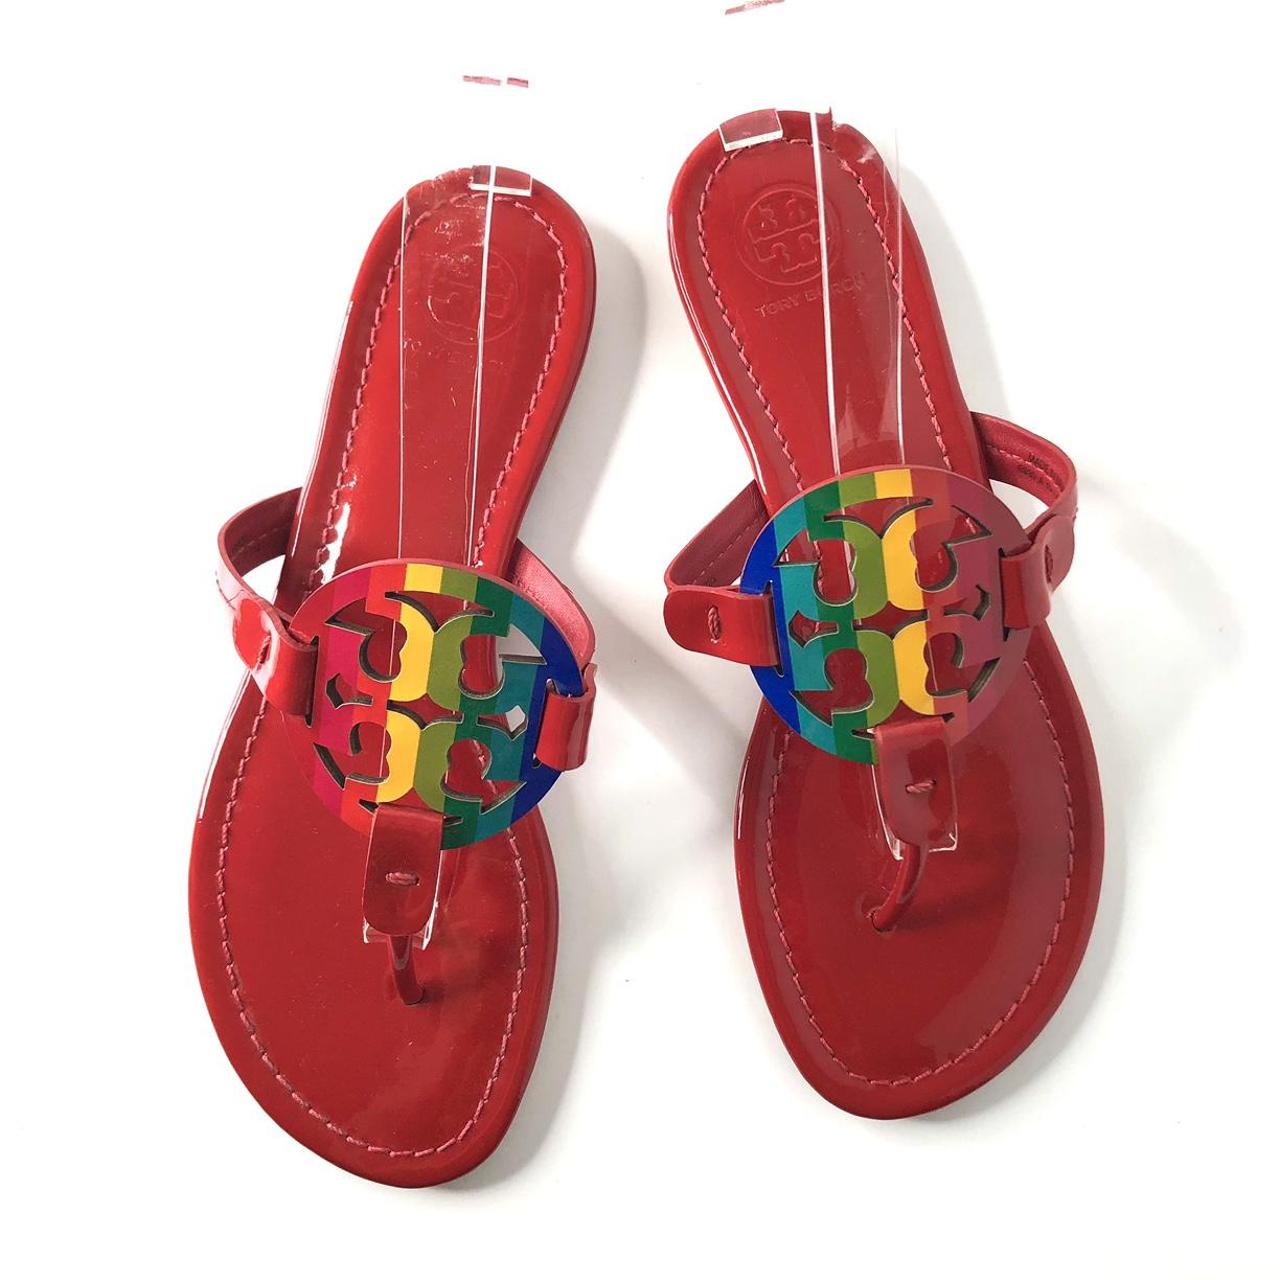 Tory Burch Women's Red and Yellow Sandals | Depop